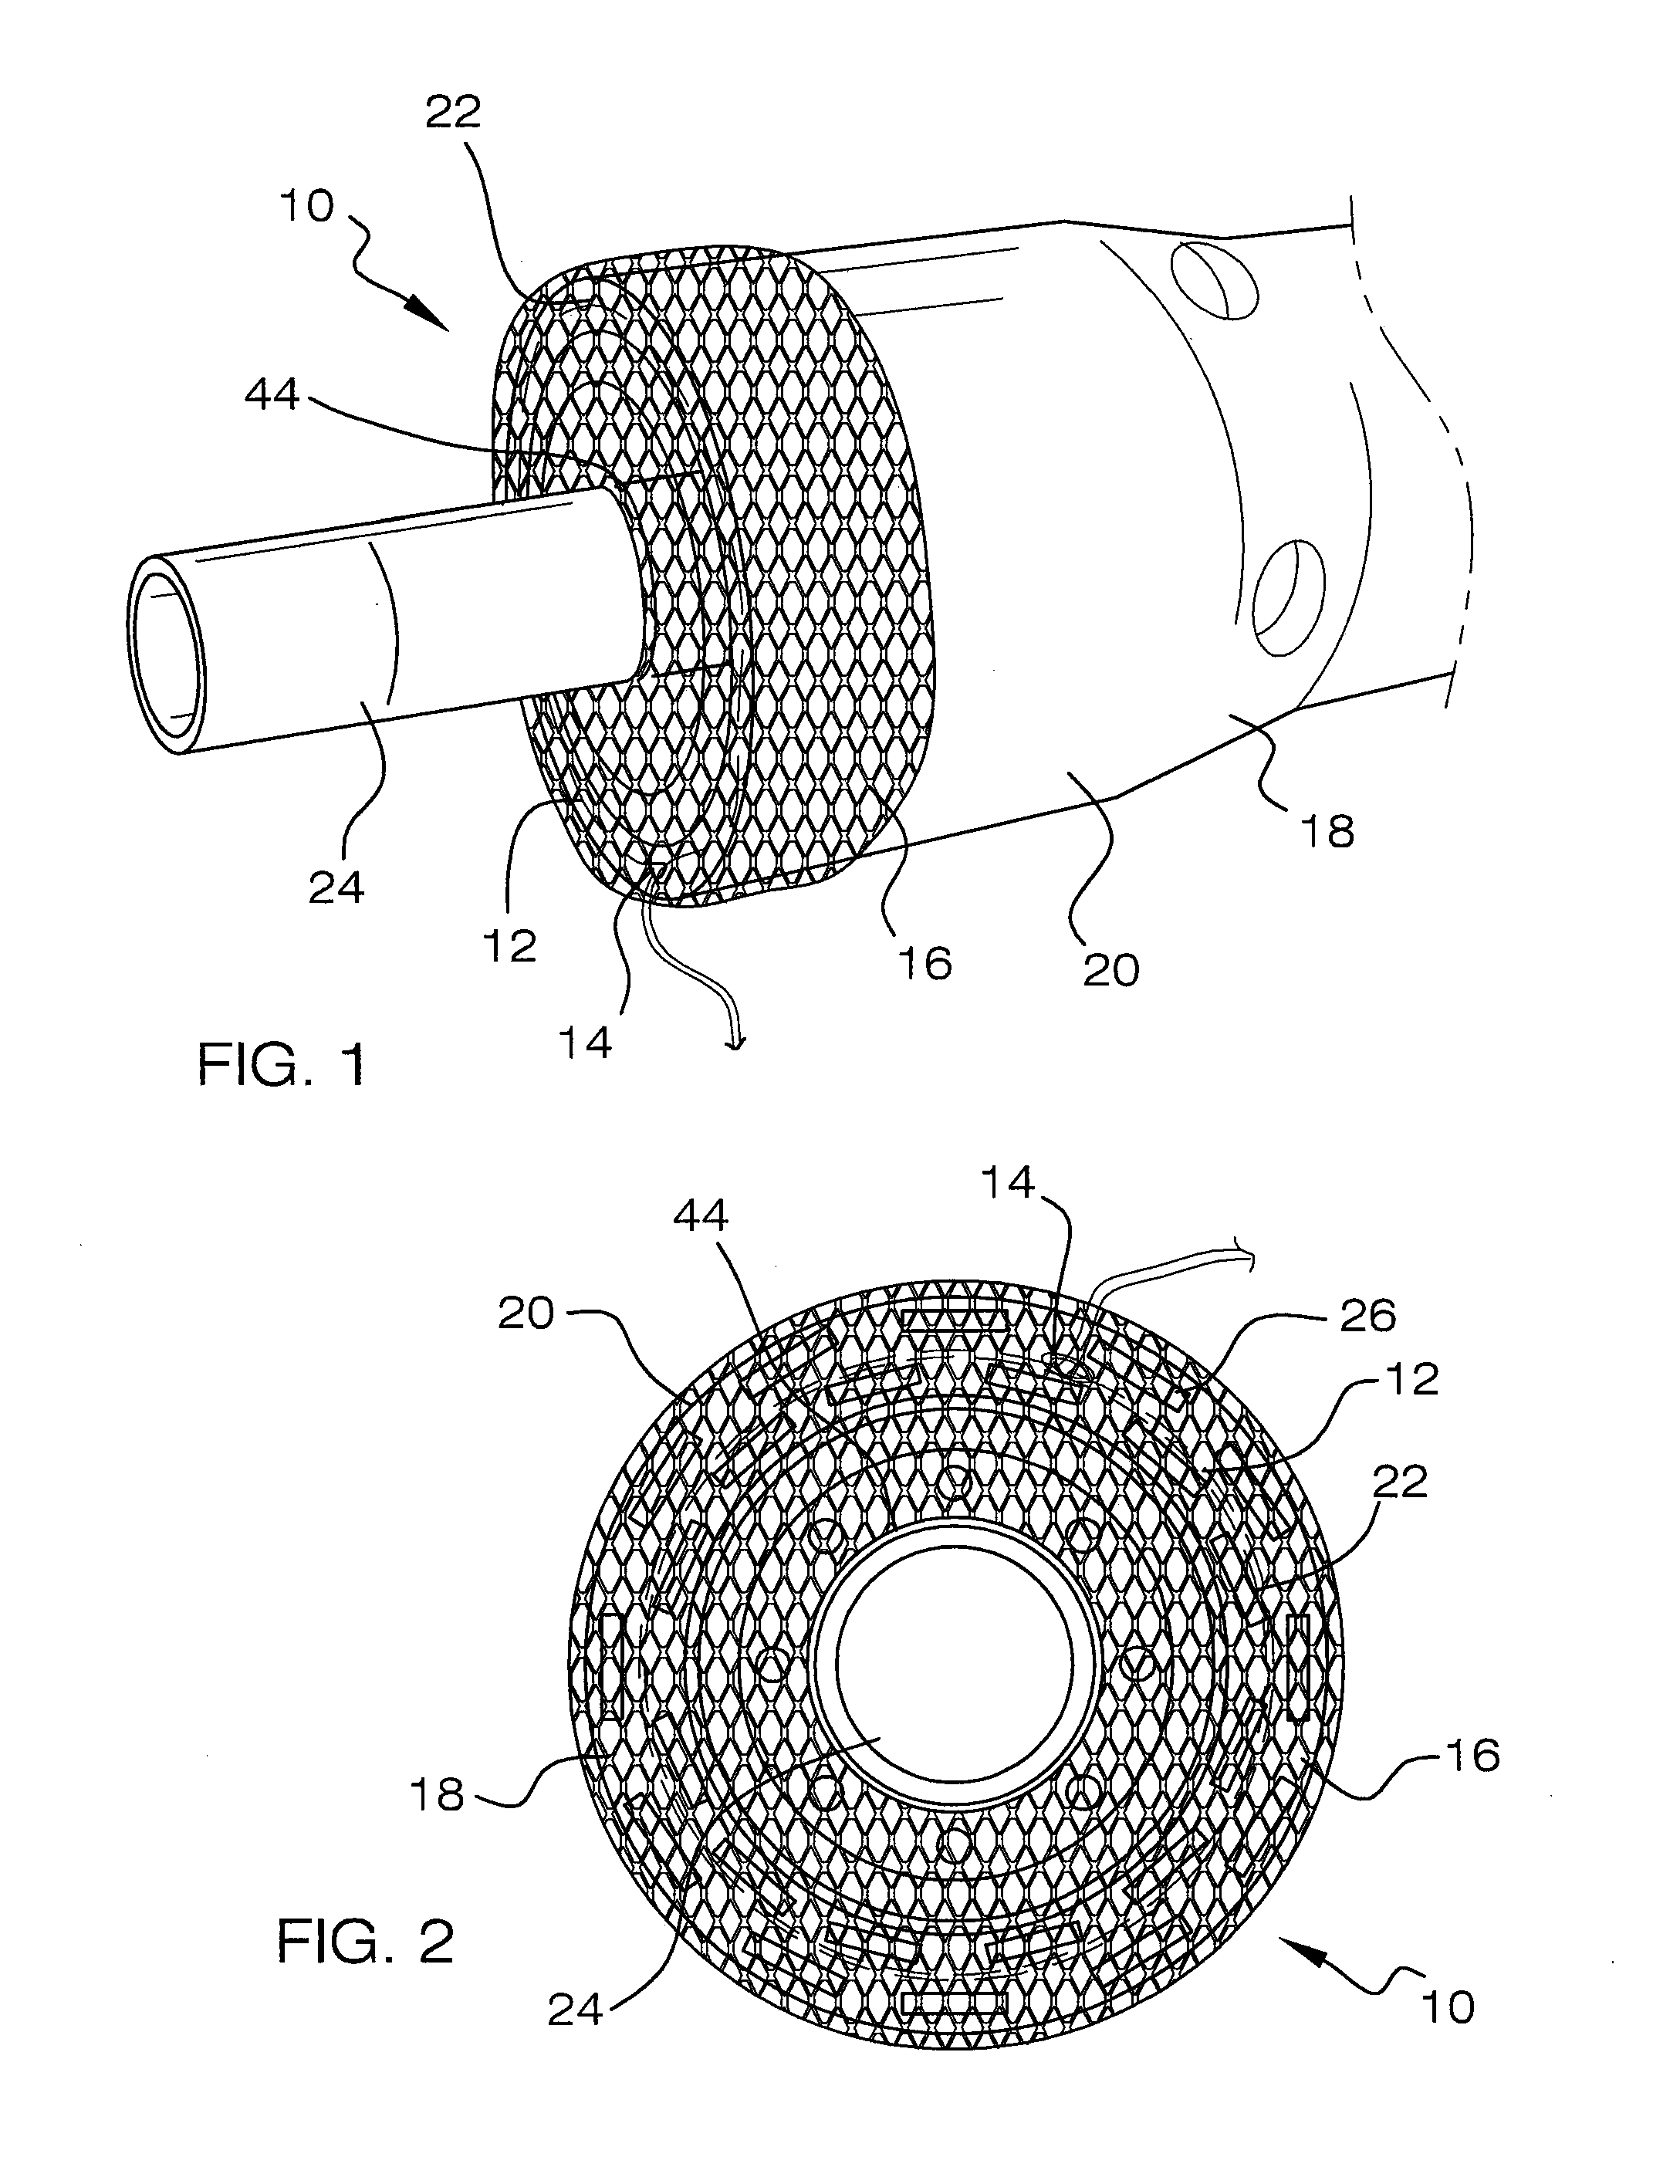 Viscerotomy closure device and method of use